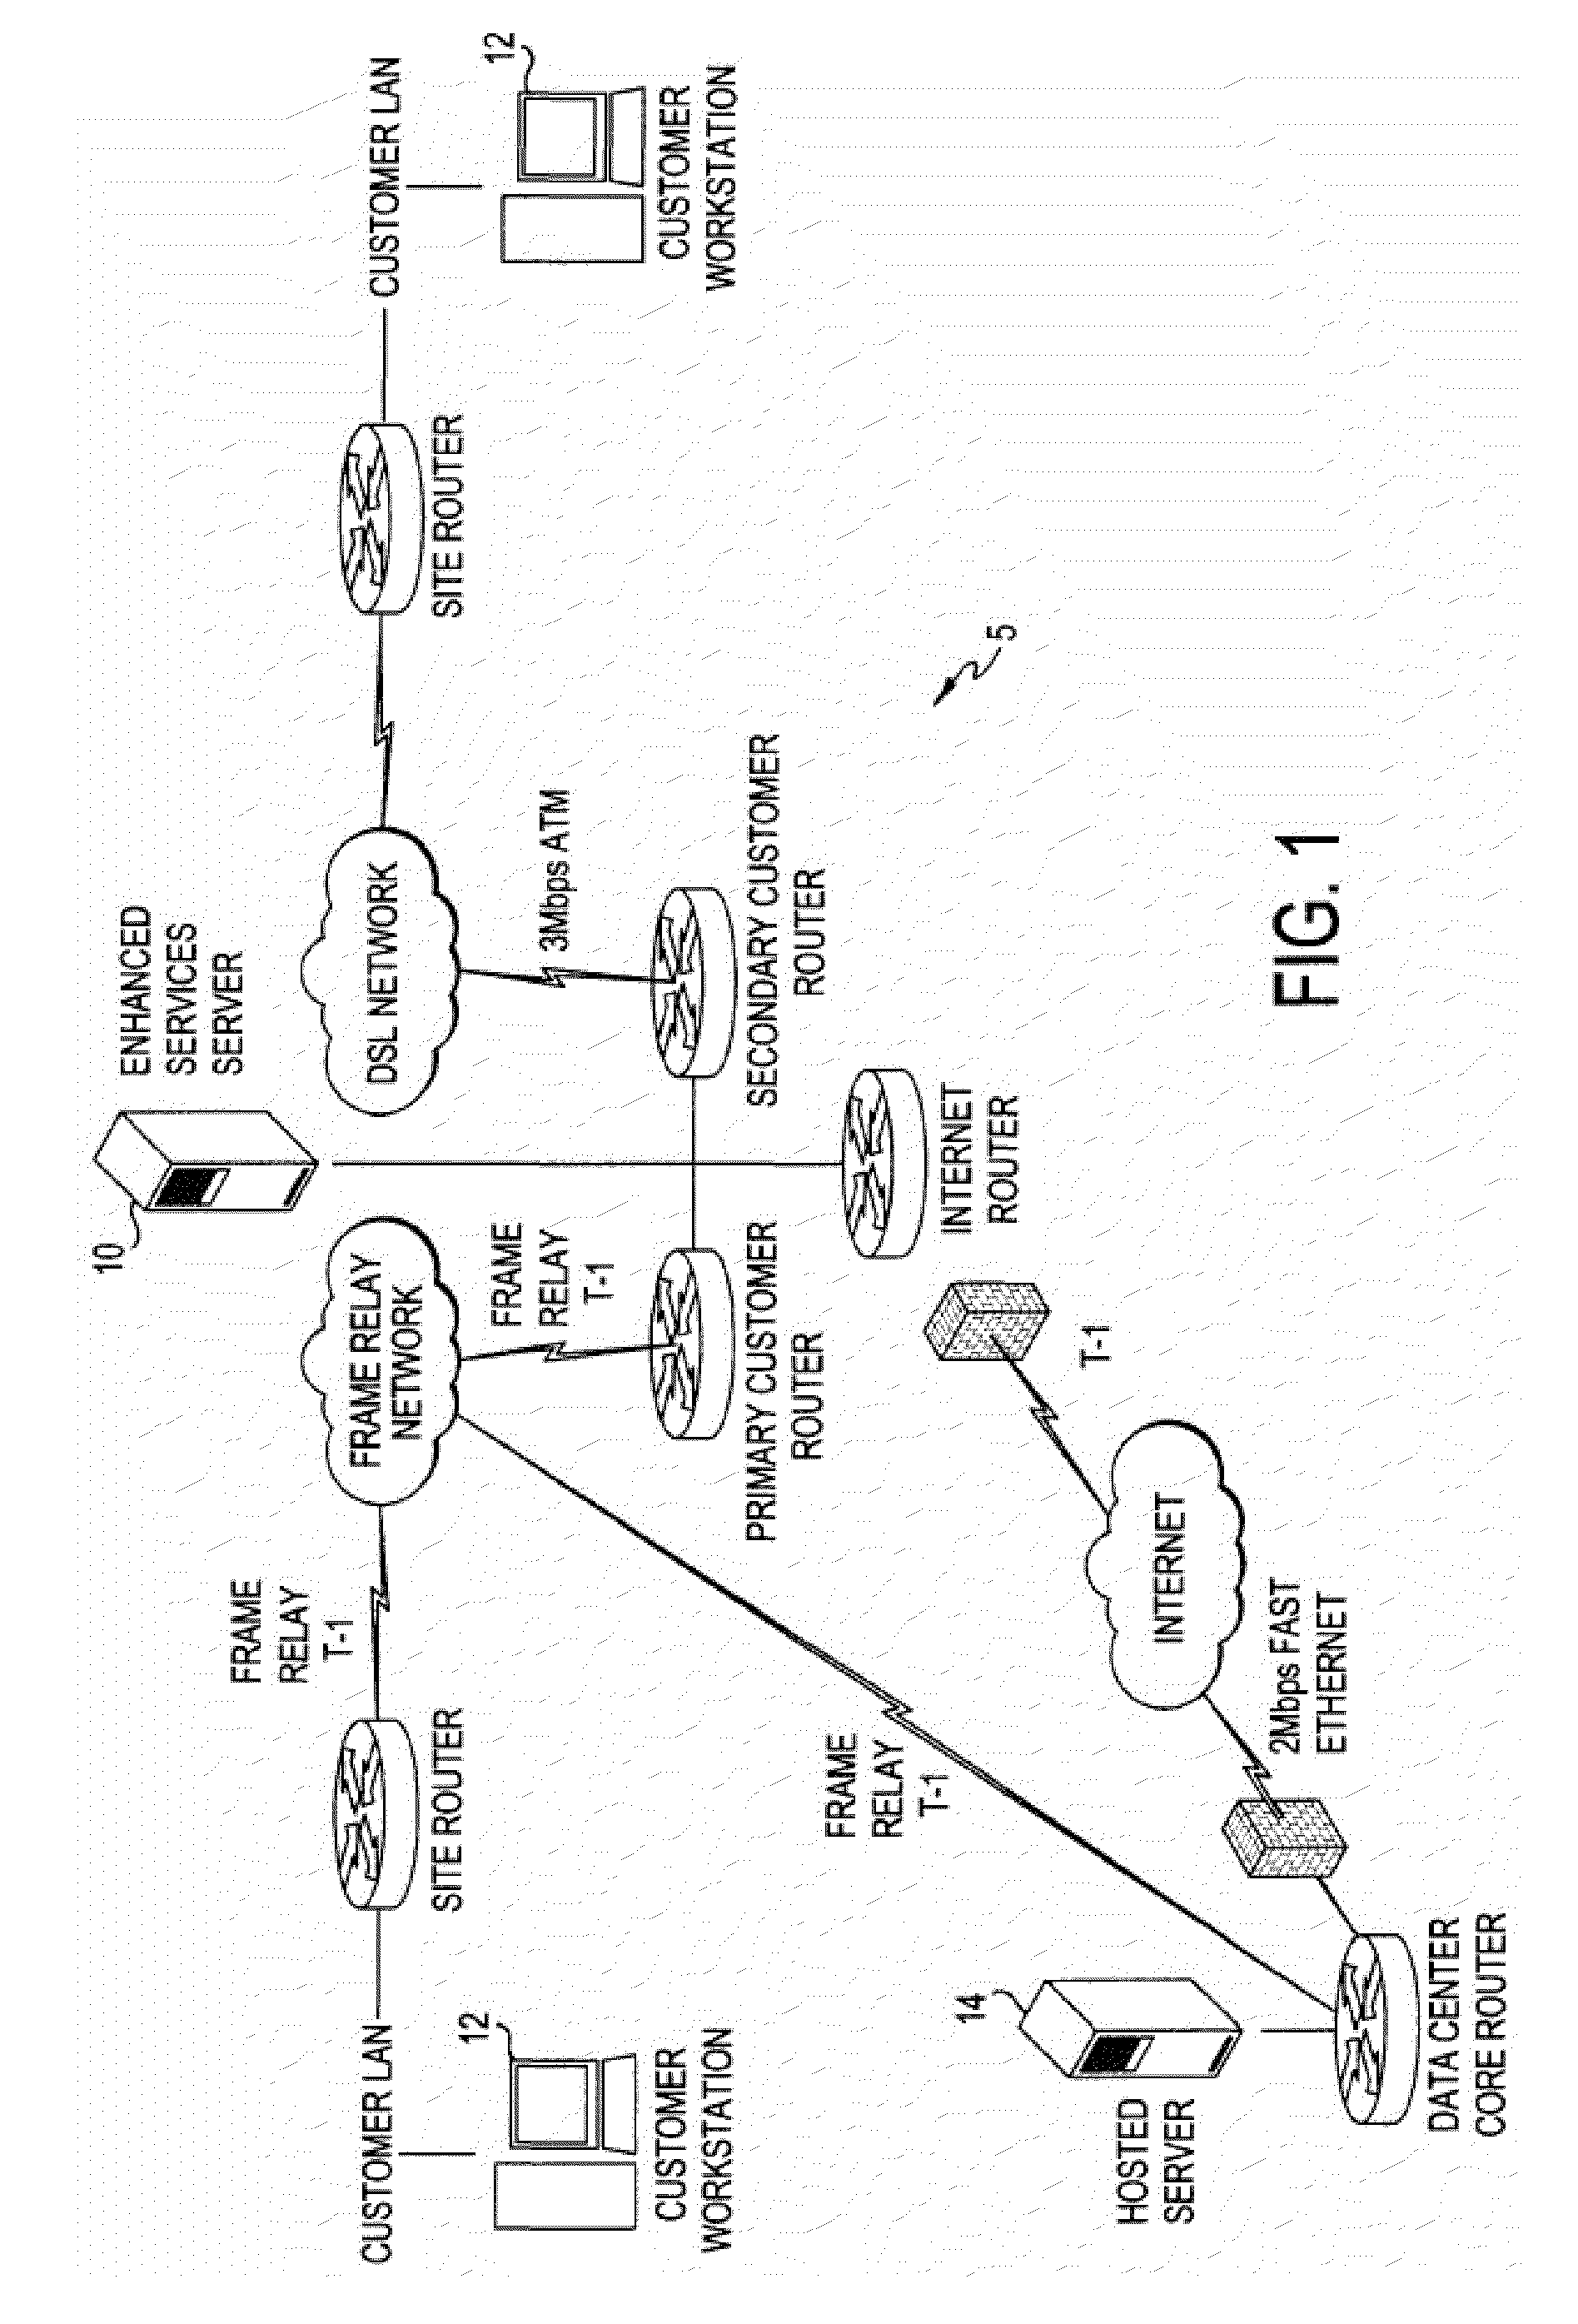 Integrated medical software system with enhanced portability